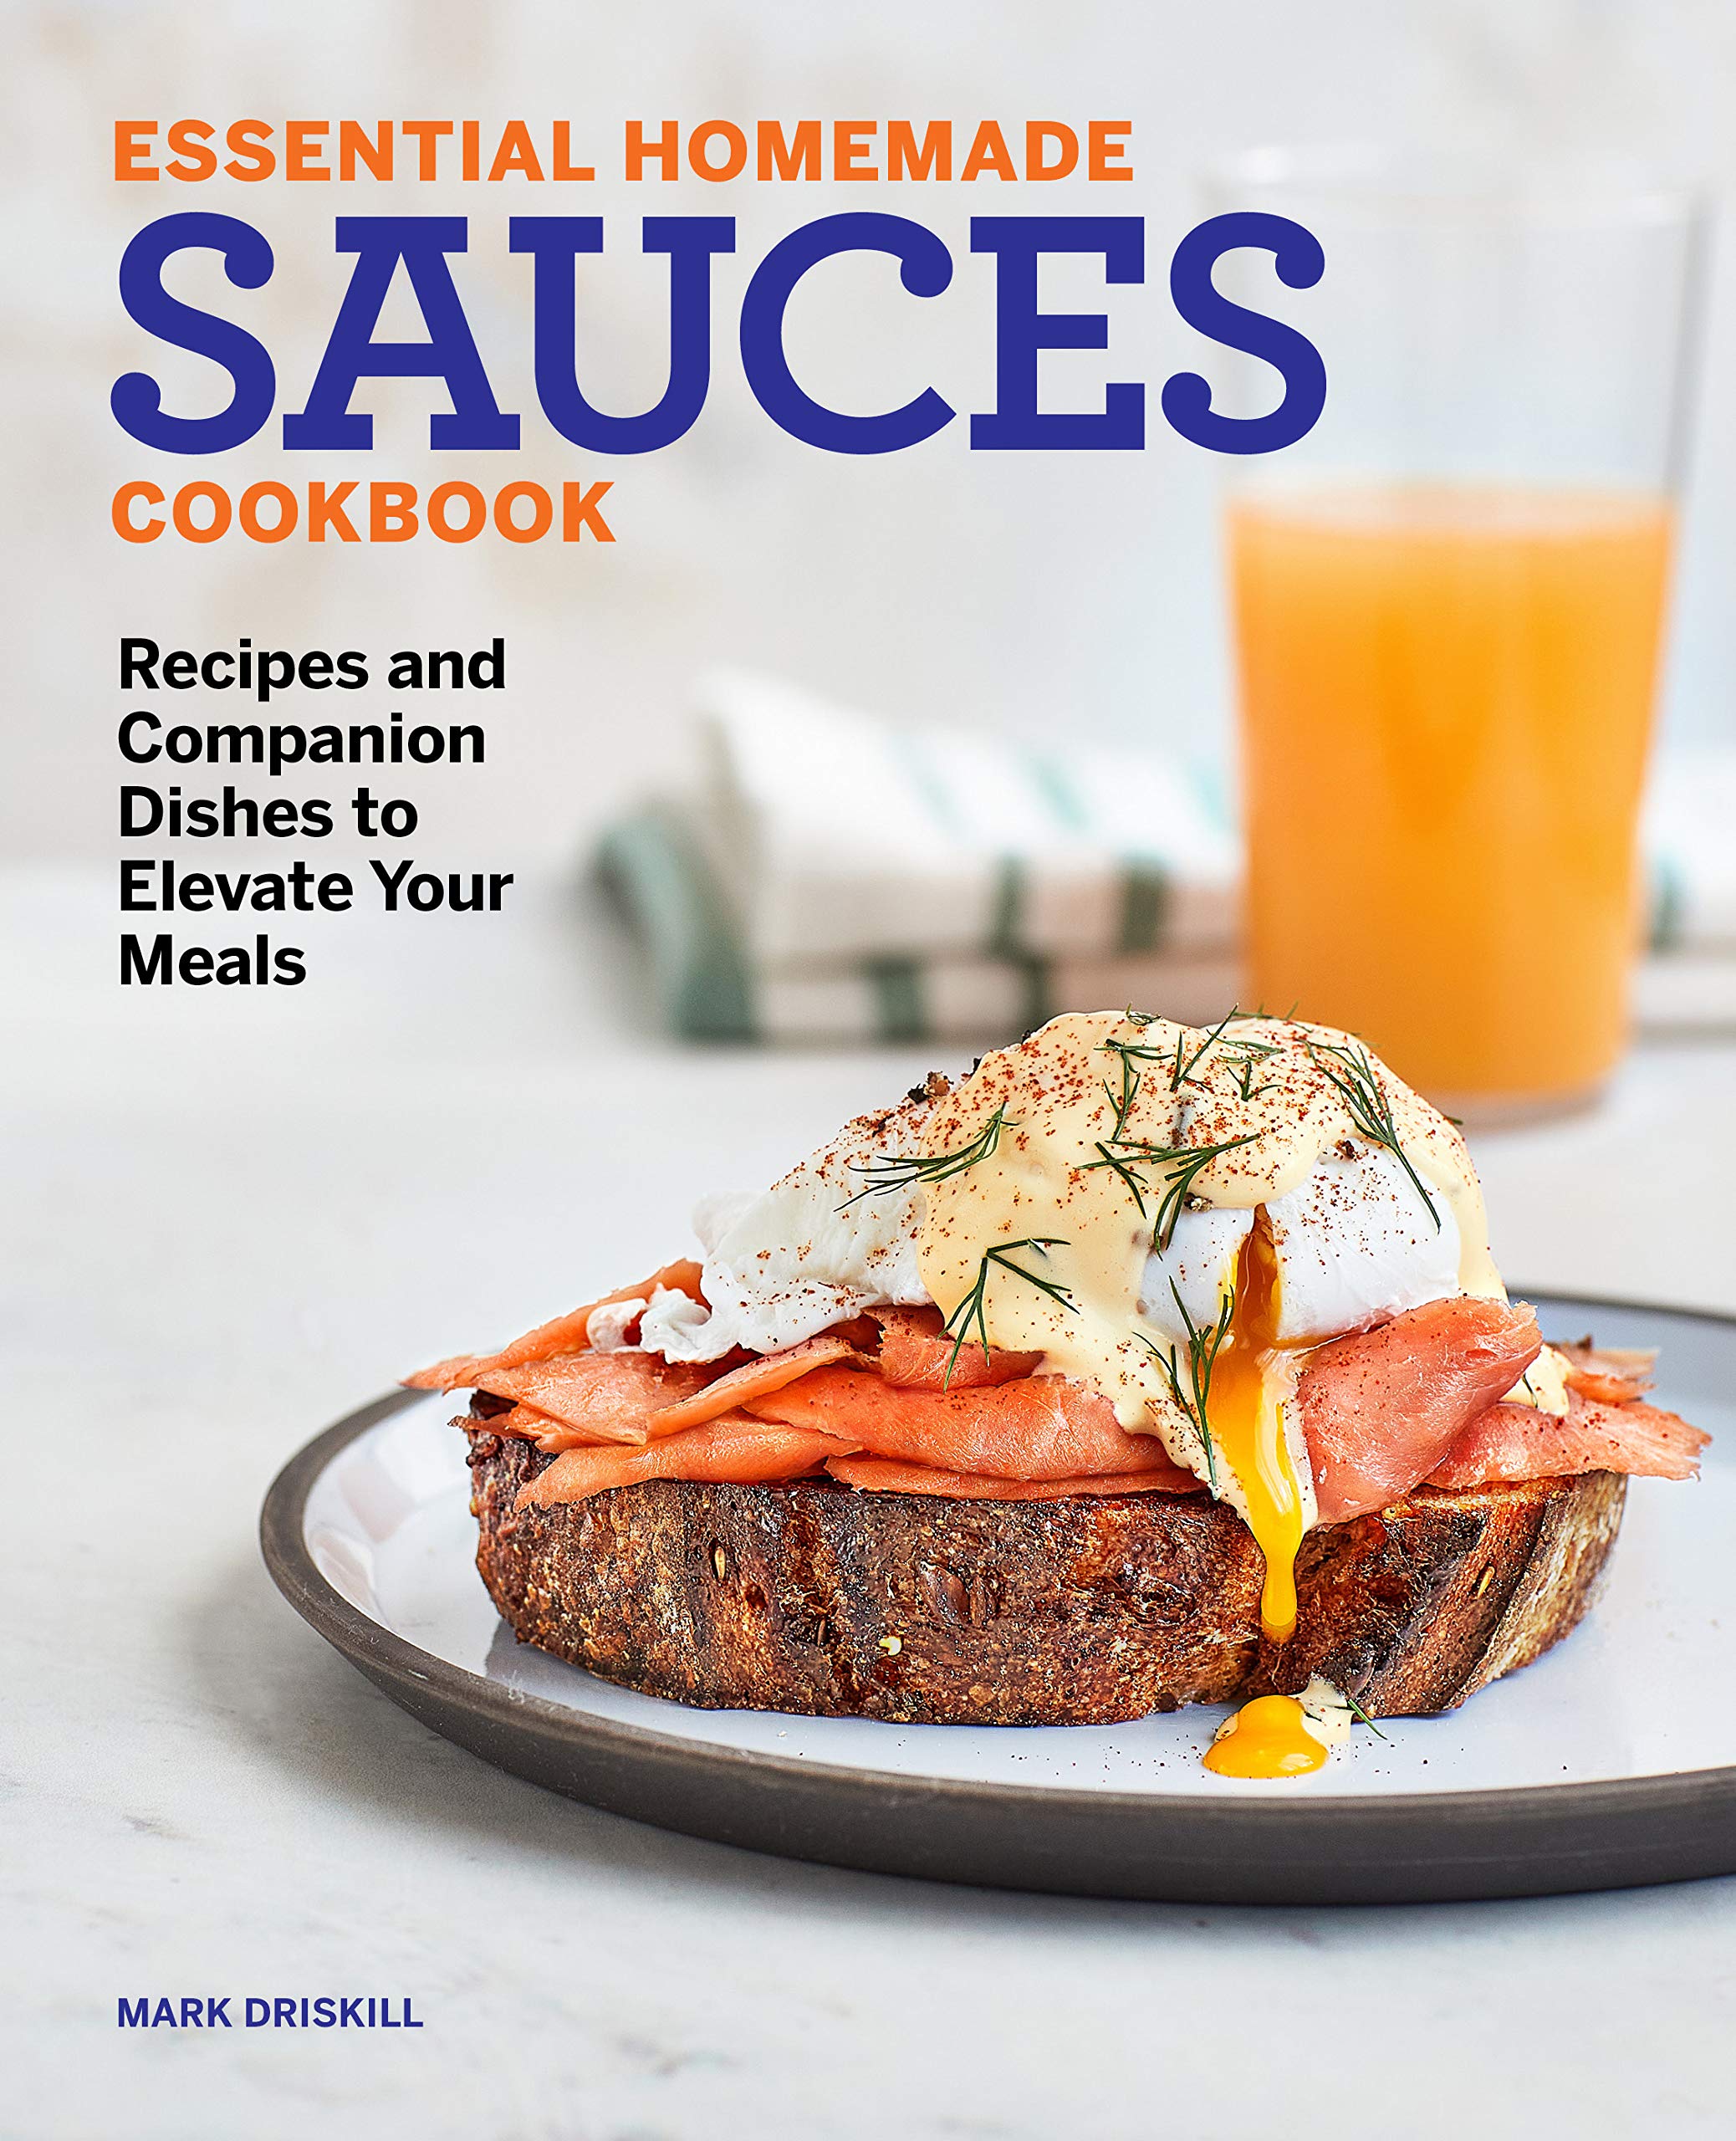 Essential Homemade Sauces Cookbook: Recipes and Companion Dishes to Elevate Your Meals (Mark Driskill)